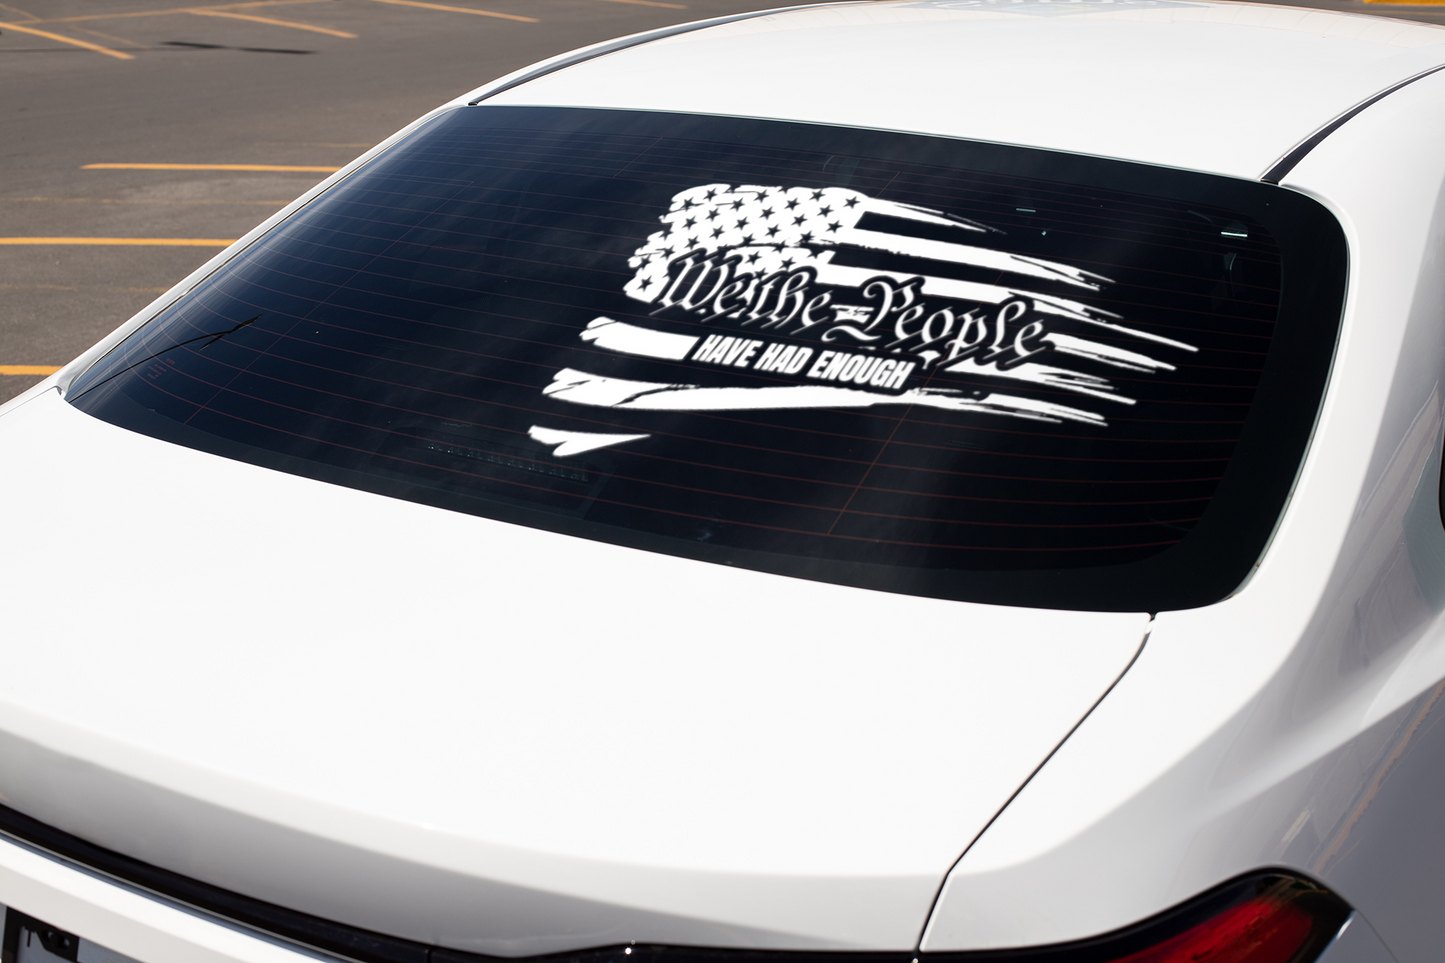 We the People have had enough Vinyl decal 2A Car Window Decal Gift For Her Him laptop decal liberty truck decals truck decals country truck decals for men van decals